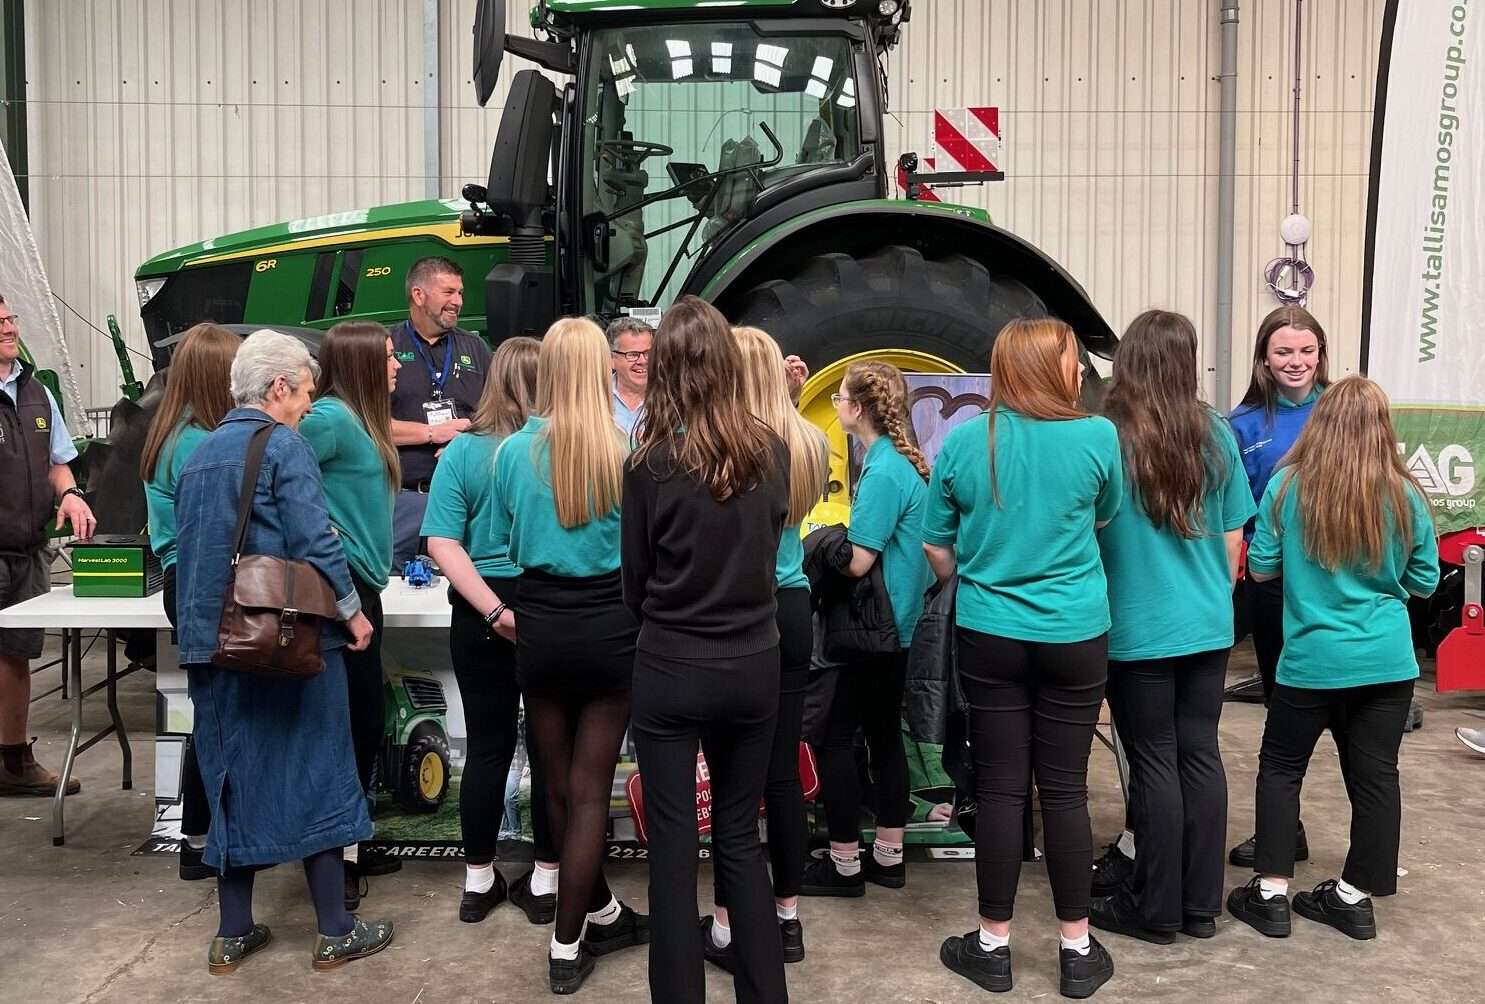 School children invited to make pancakes by Agricultural Society in Pembrokeshire